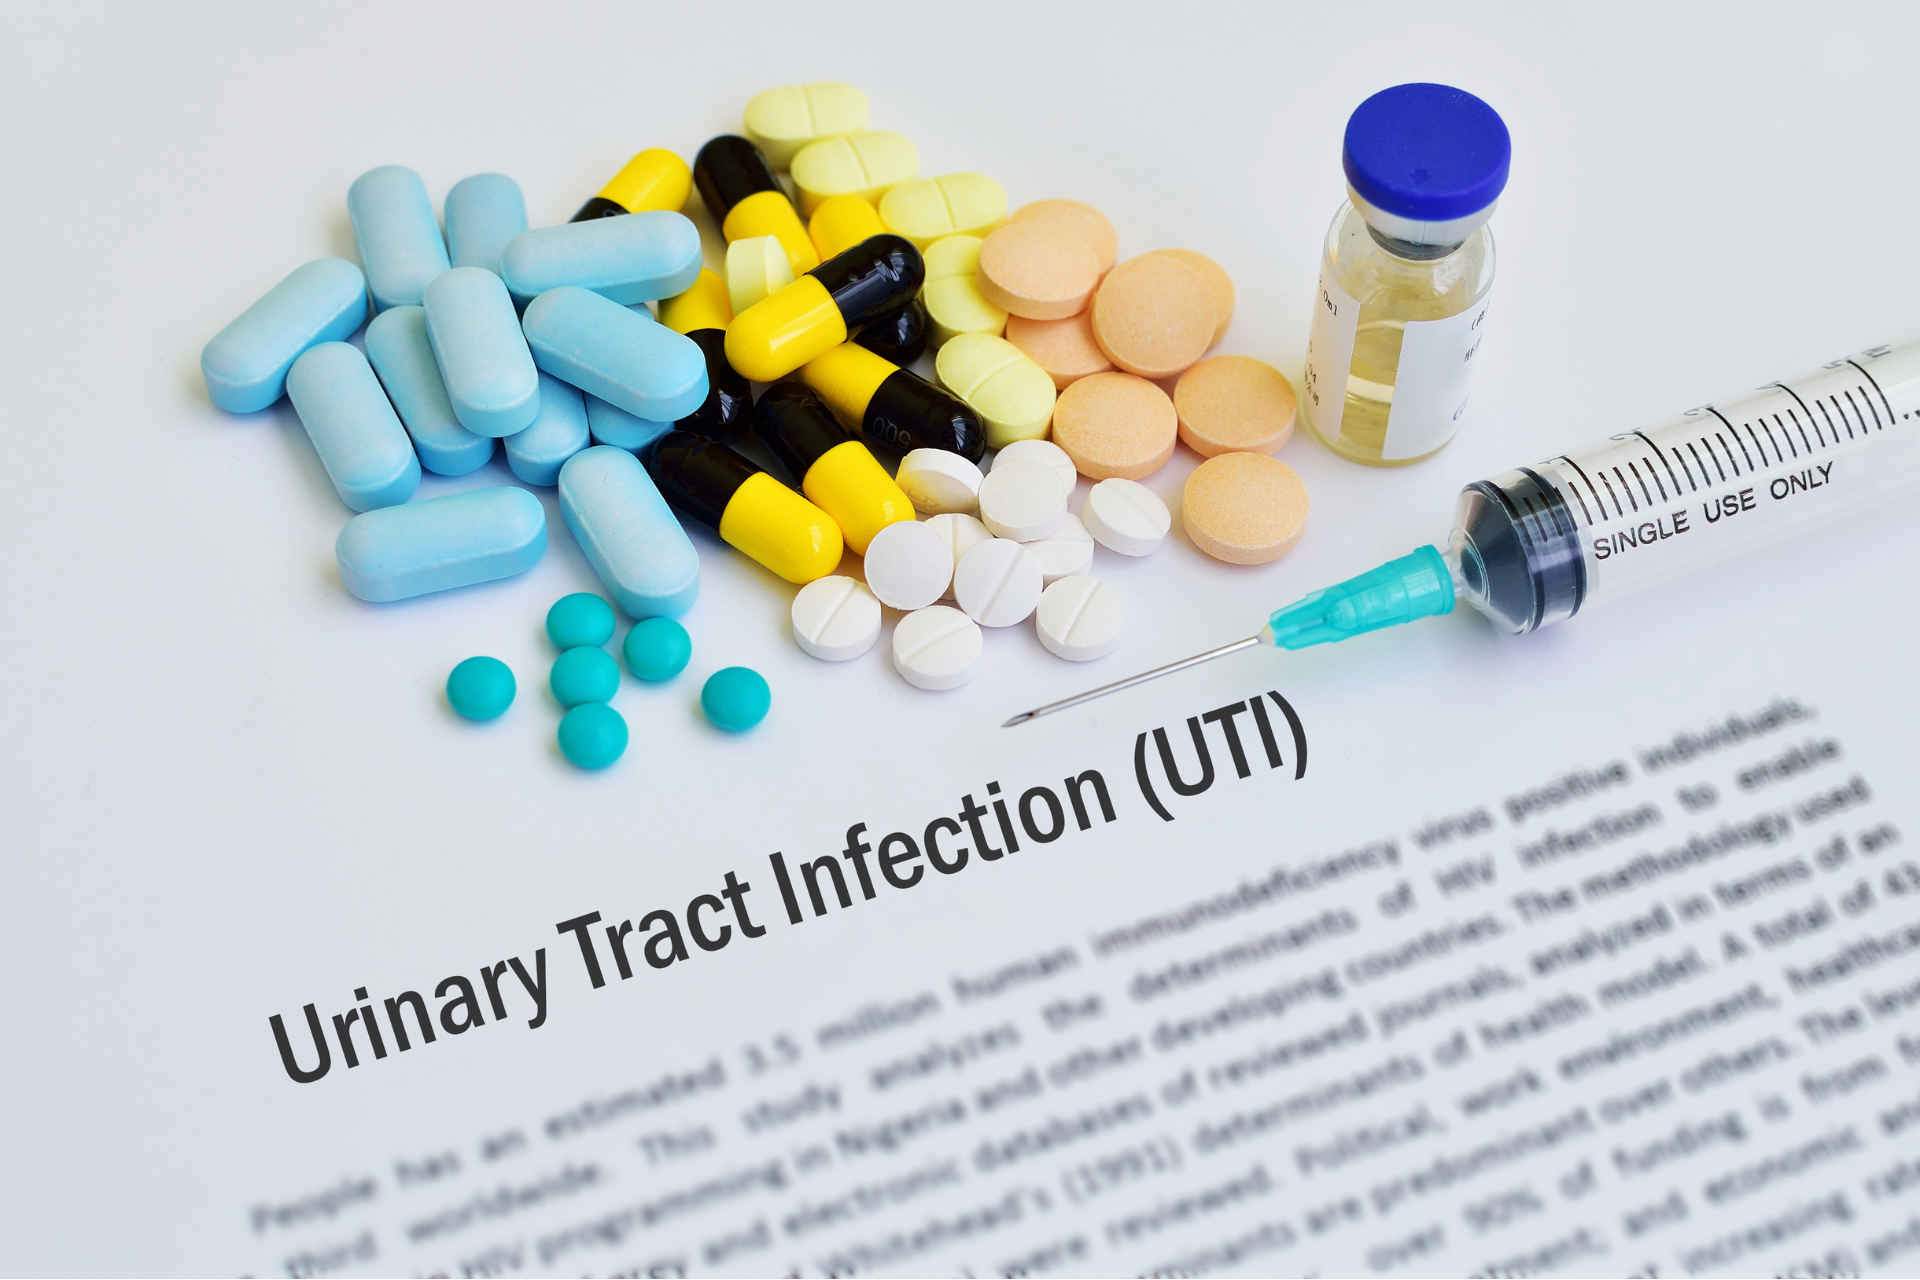 Urinary Tract Infection (UTI) Letchworth